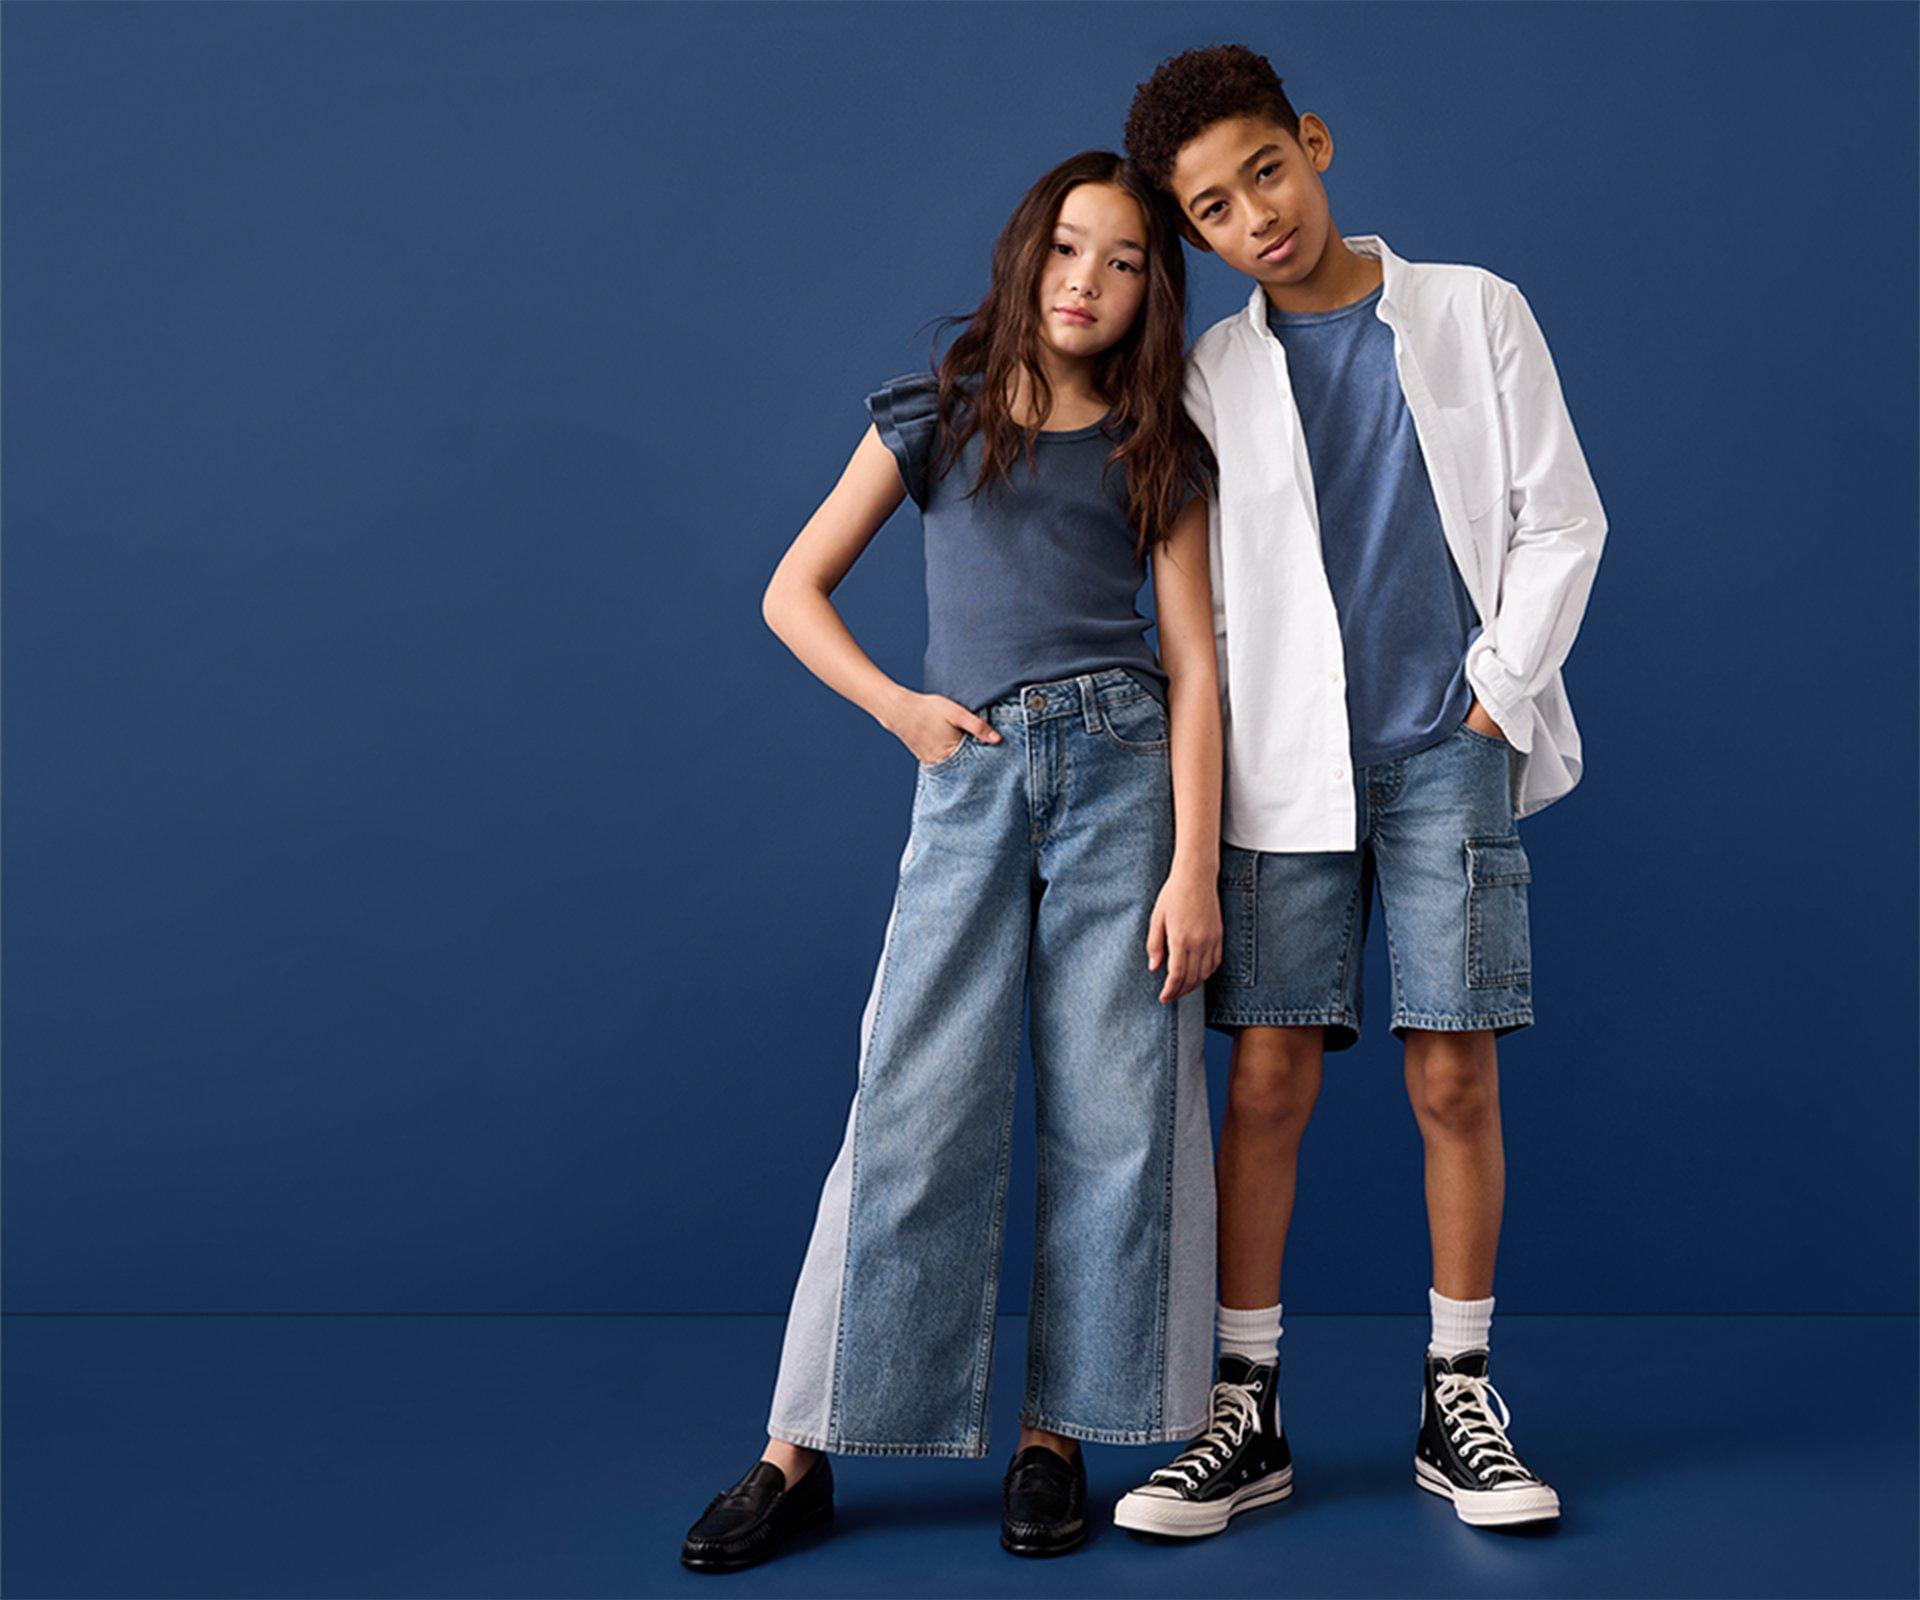 New Arrivals: Aspirational Casual, Cool, Classic Gap Styles